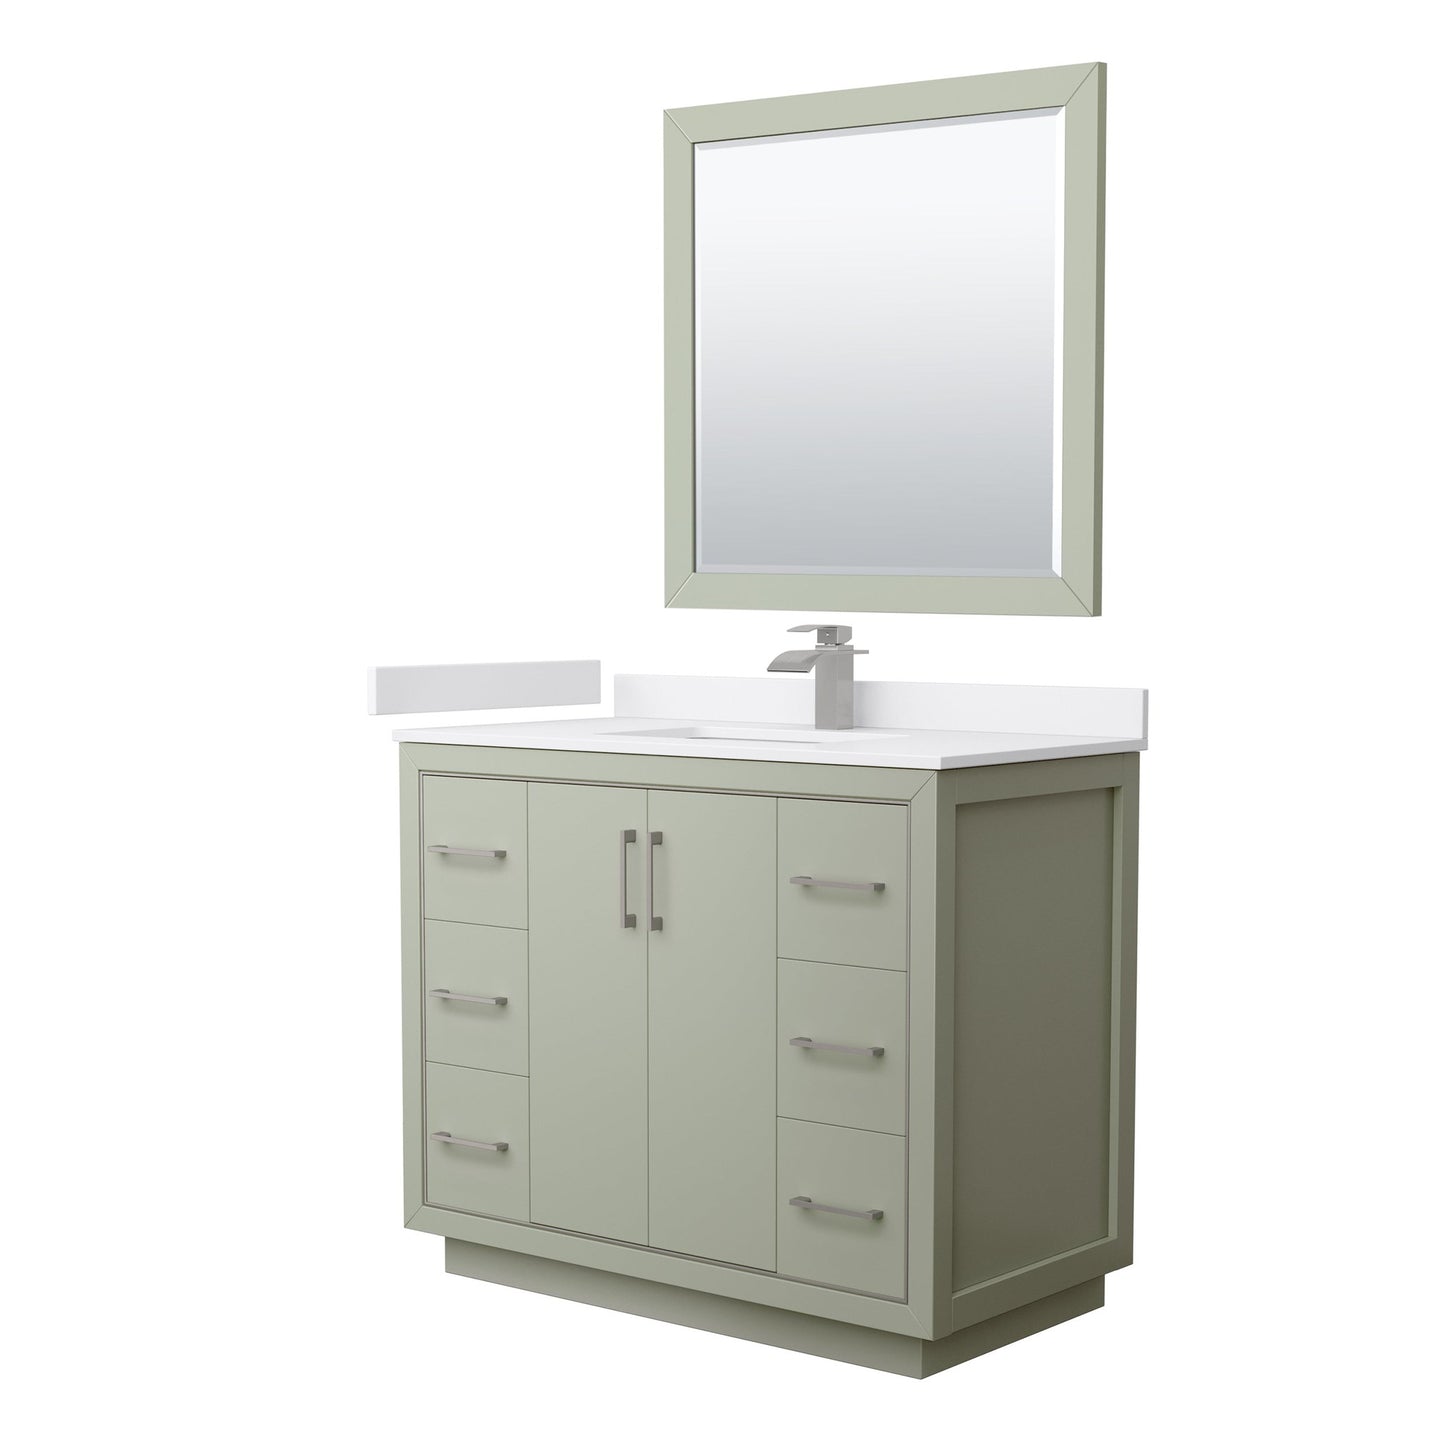 Wyndham Collection Icon 42" Single Bathroom Vanity in Light Green, White Cultured Marble Countertop, Undermount Square Sink, Brushed Nickel Trim, 34" Mirror